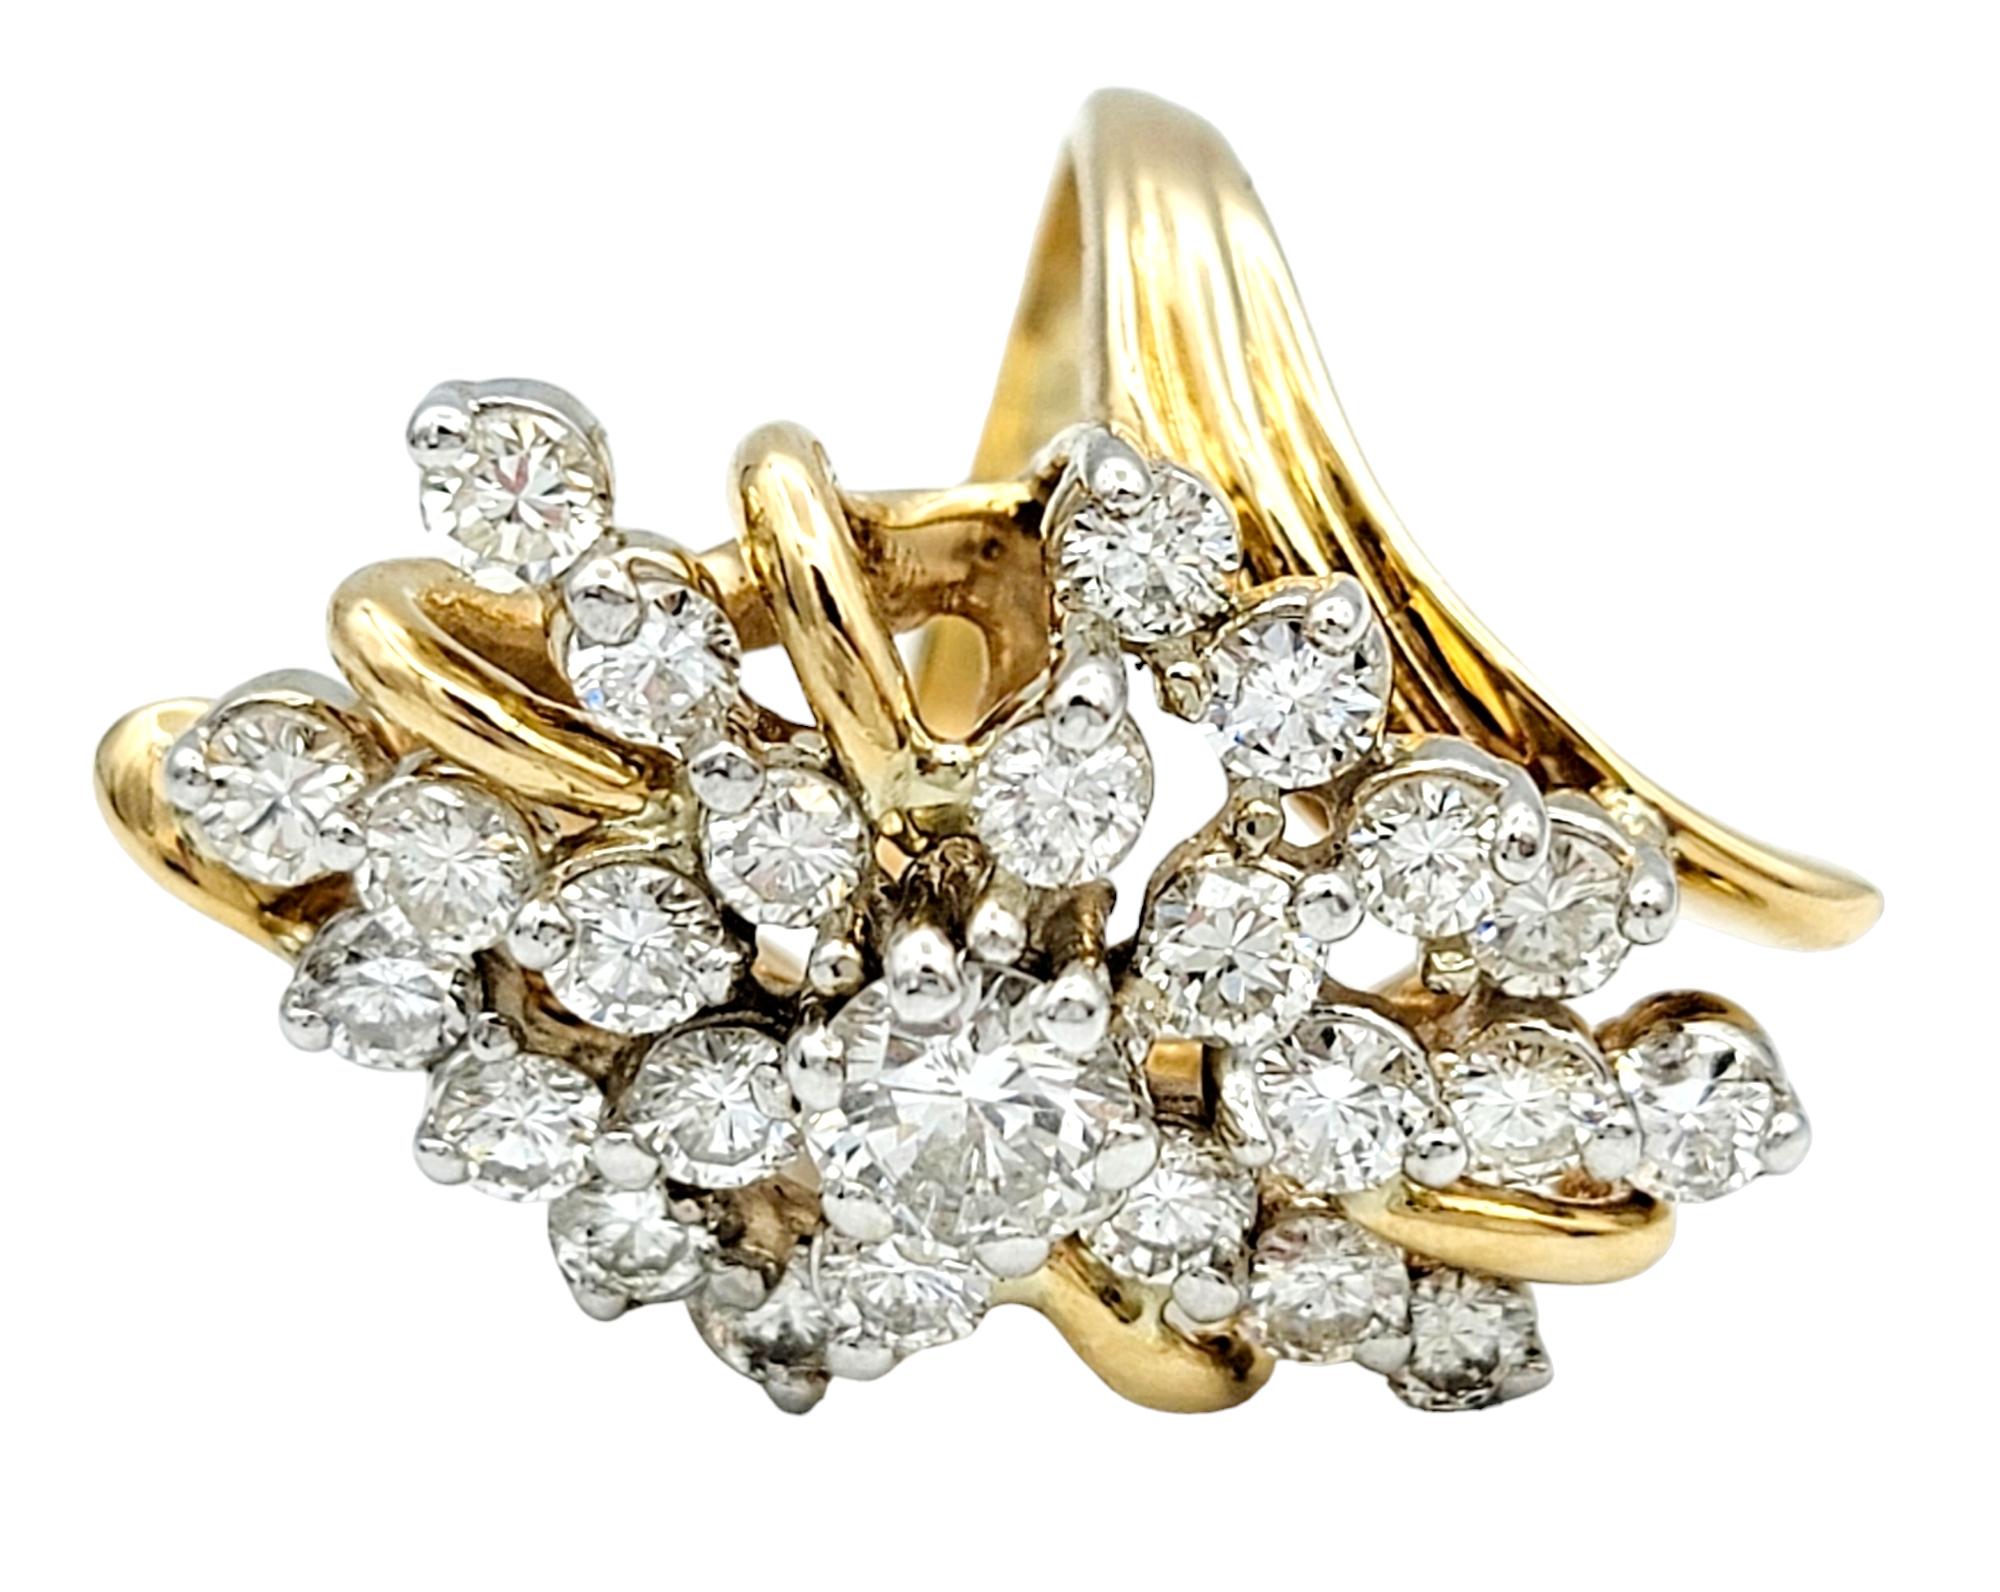 Contemporary 3.01 Carat Total Round Diamond Elongated Cluster Ring in 14 Karat Yellow Gold For Sale